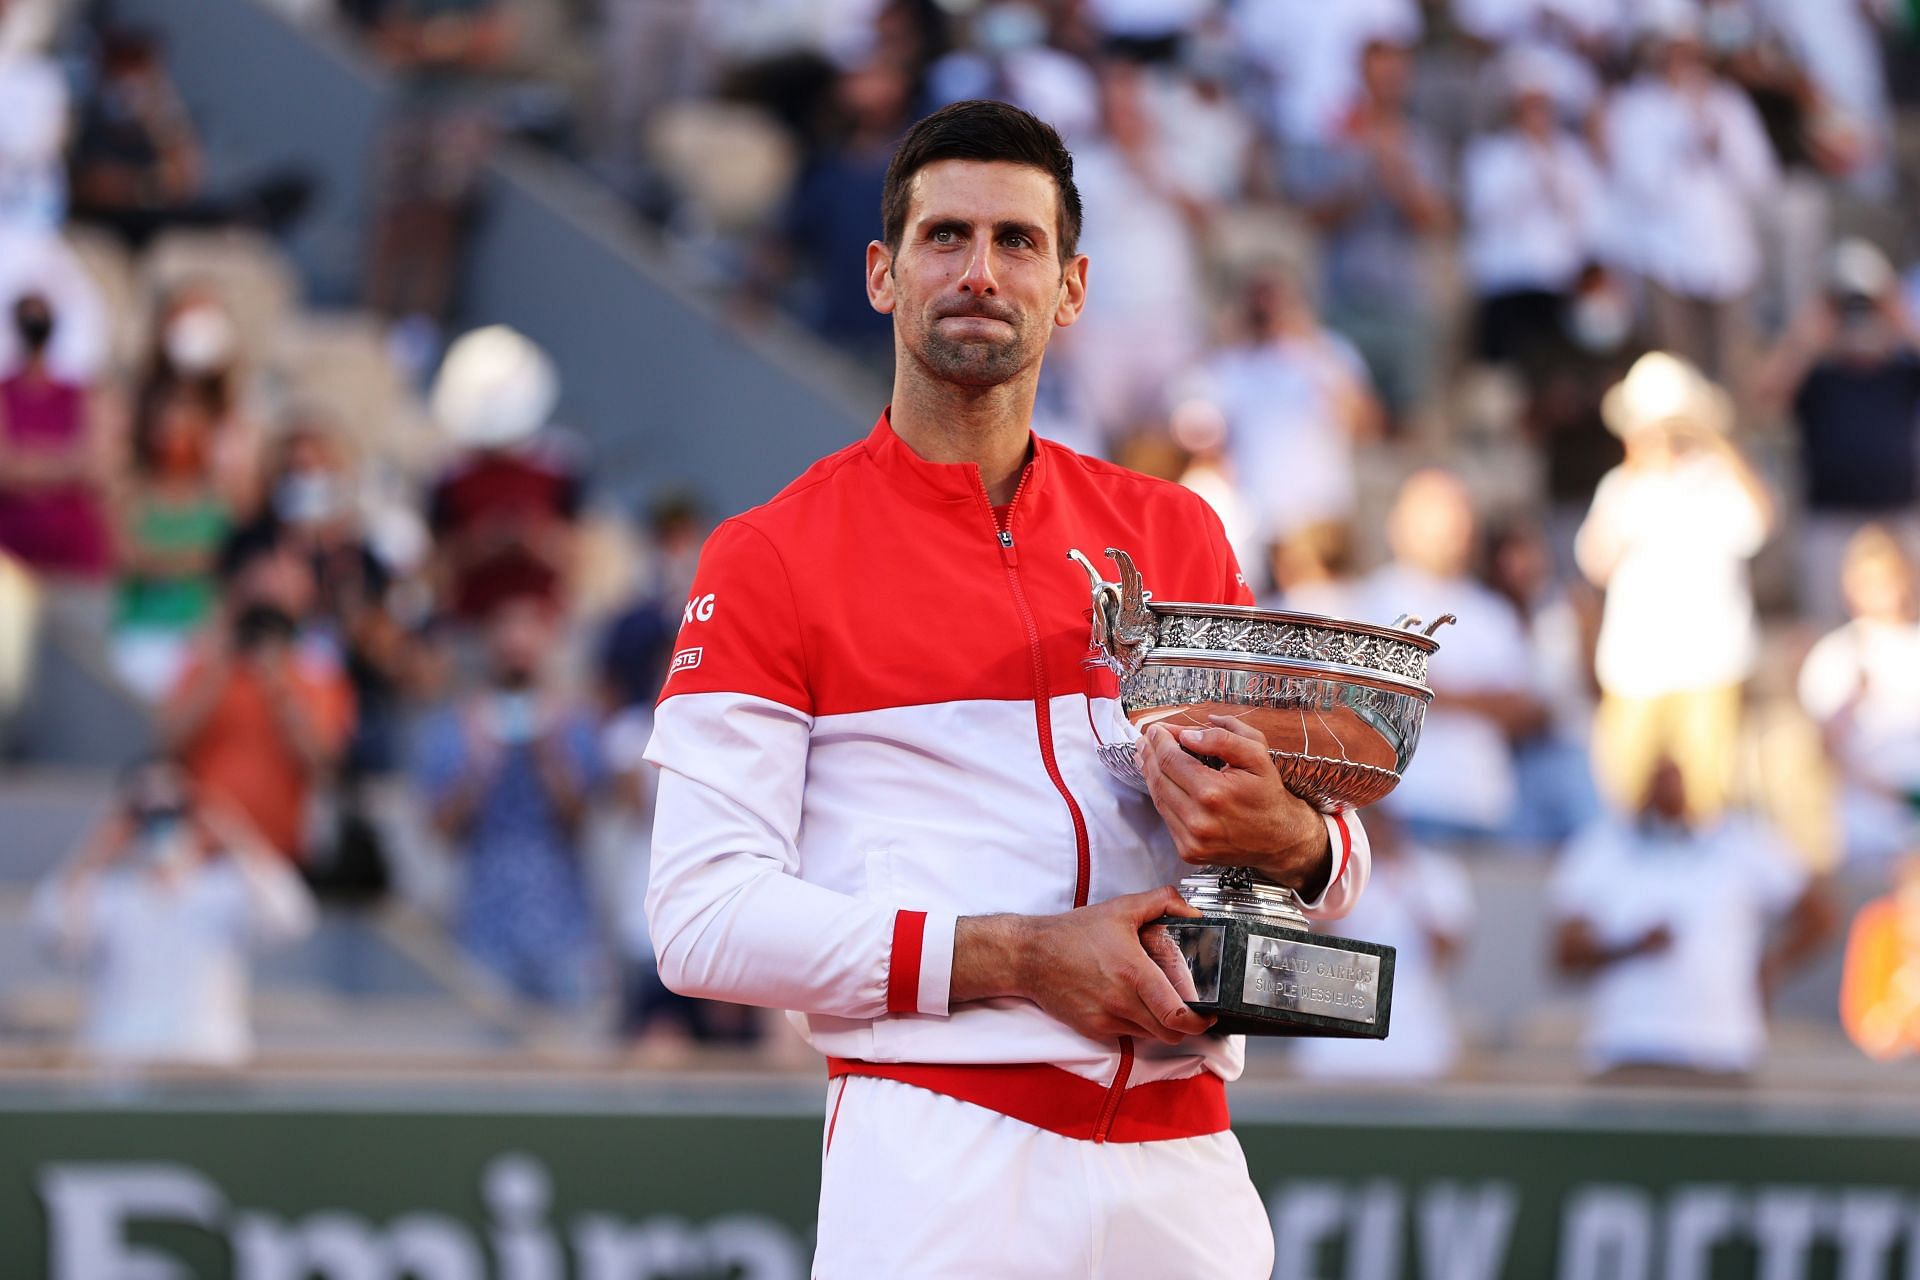 Novak Djokovic could take part in the French Open